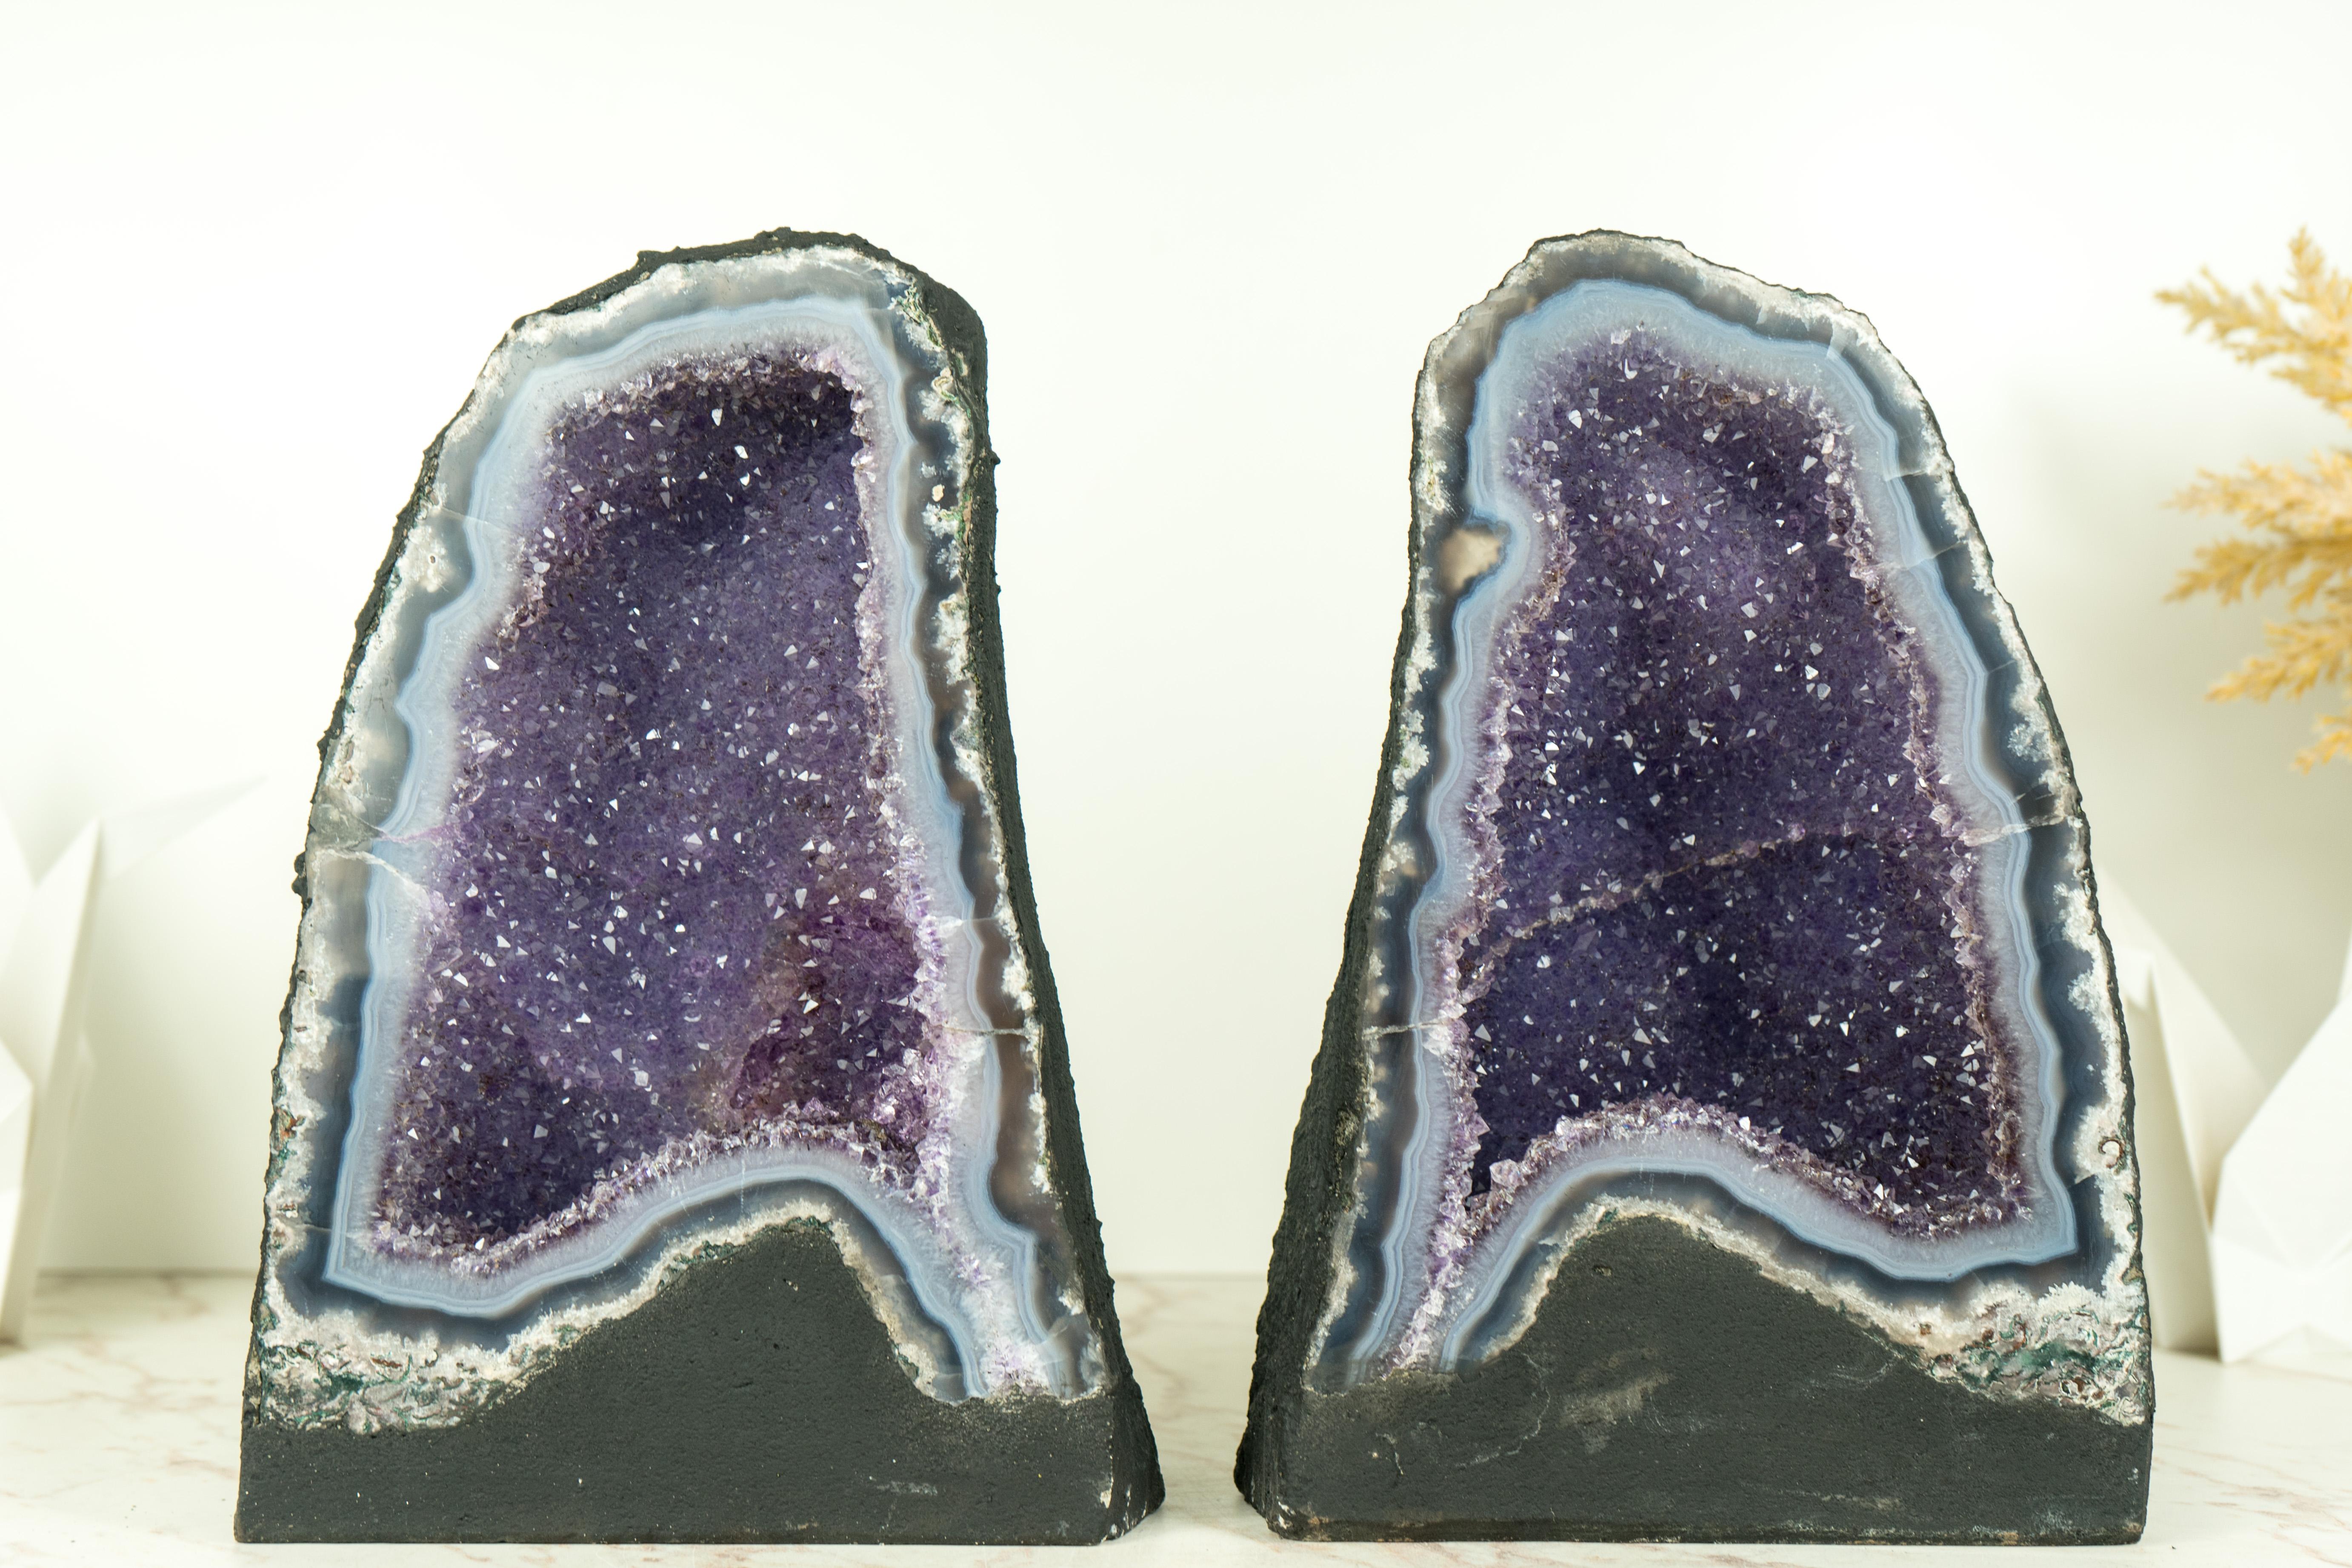 Pair of High-Grade Small Blue Lace Agate Geodes with Sparkly Lavender Amethyst For Sale 7